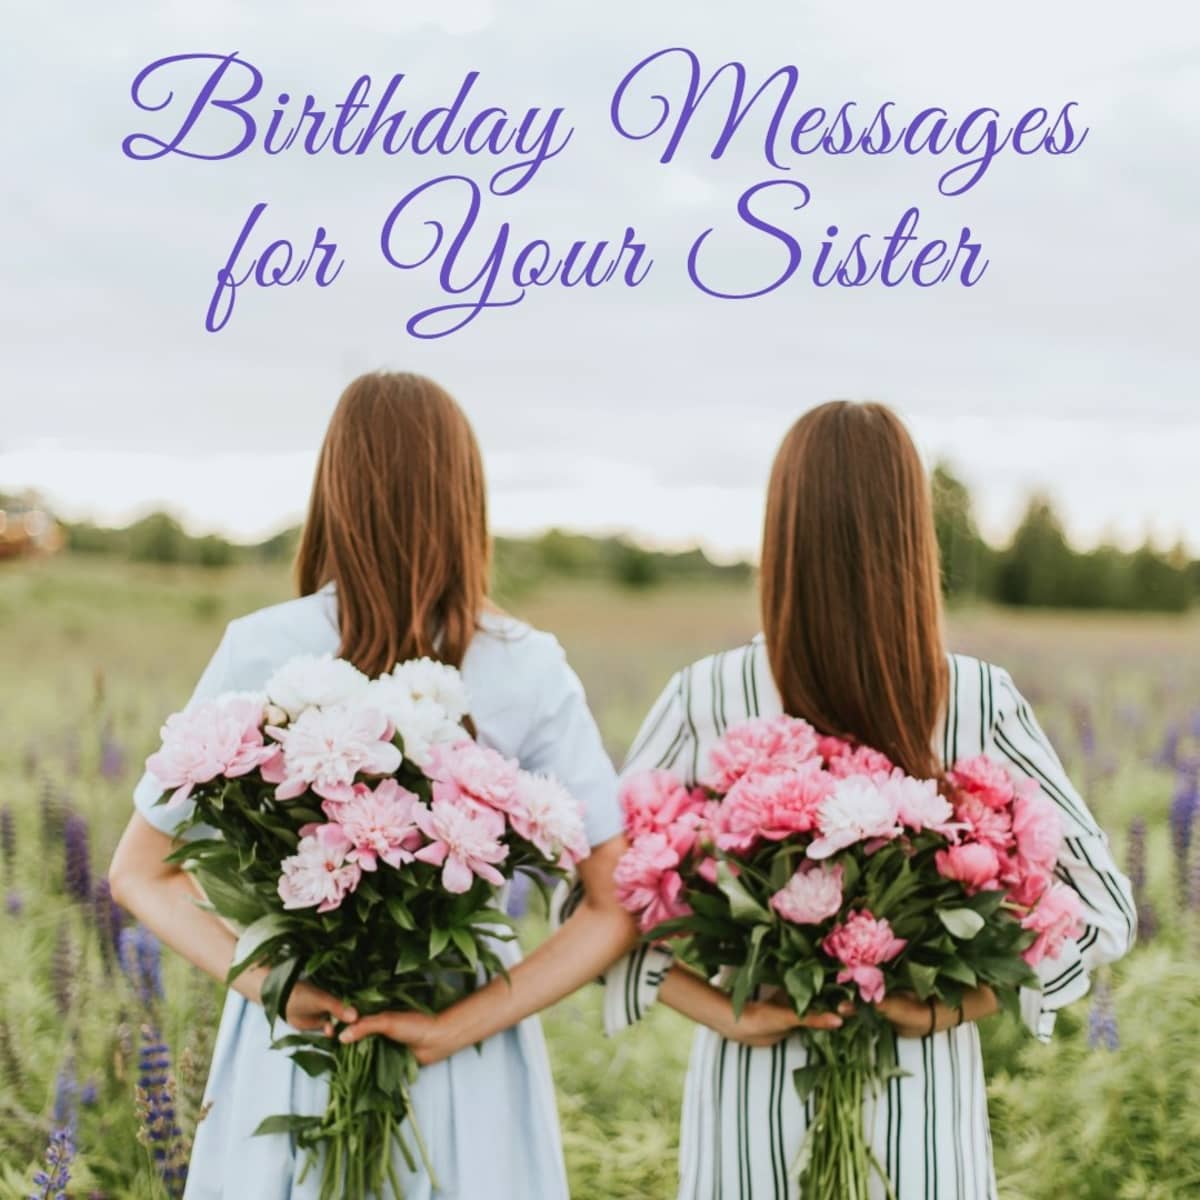 Birthday Wishes for a Sister: Messages and Poems - Holidappy